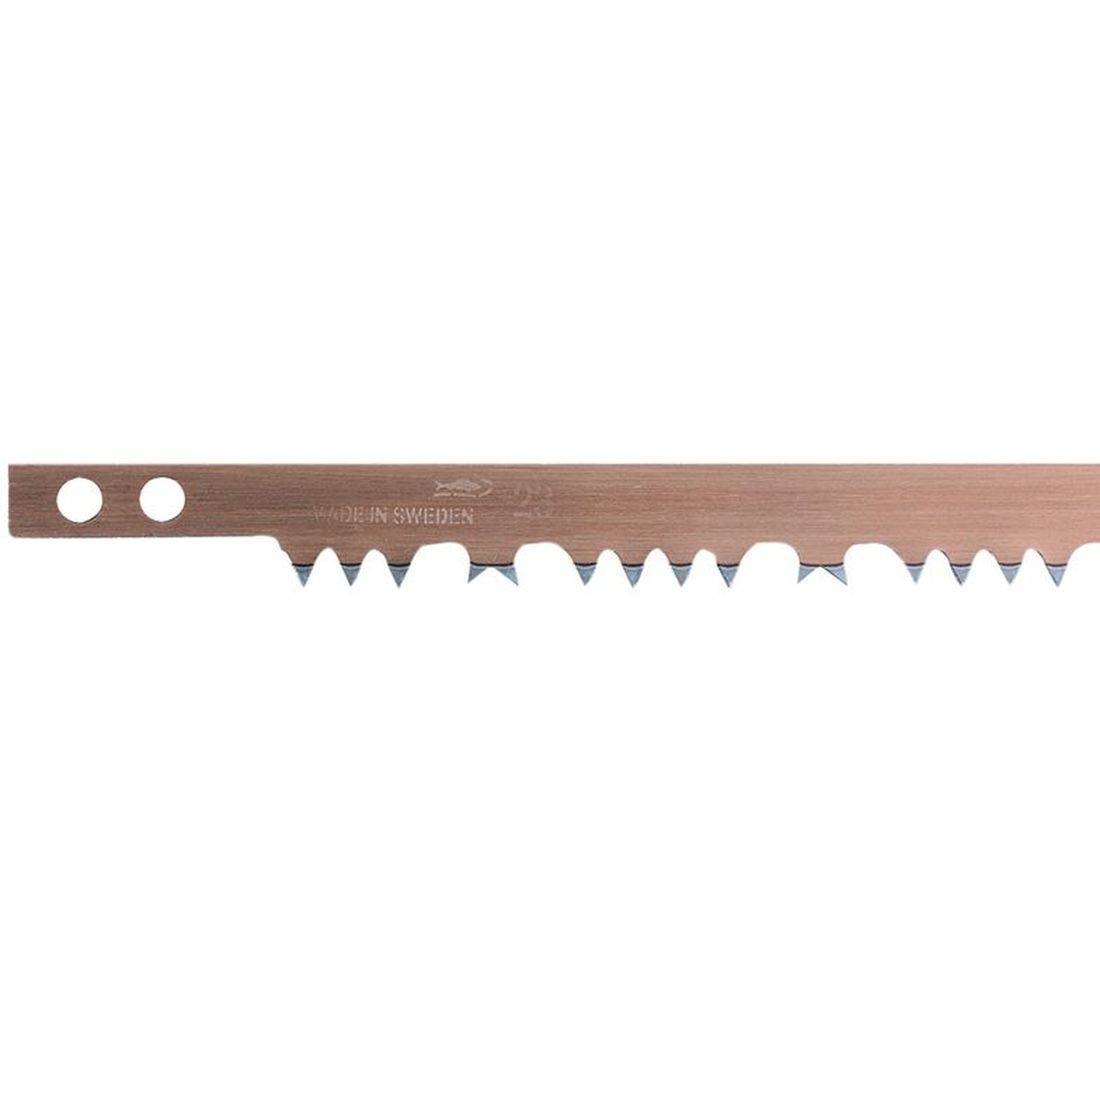 Bahco 23-24 Raker Tooth Hard Point Bowsaw Blade 600mm (24in)                          